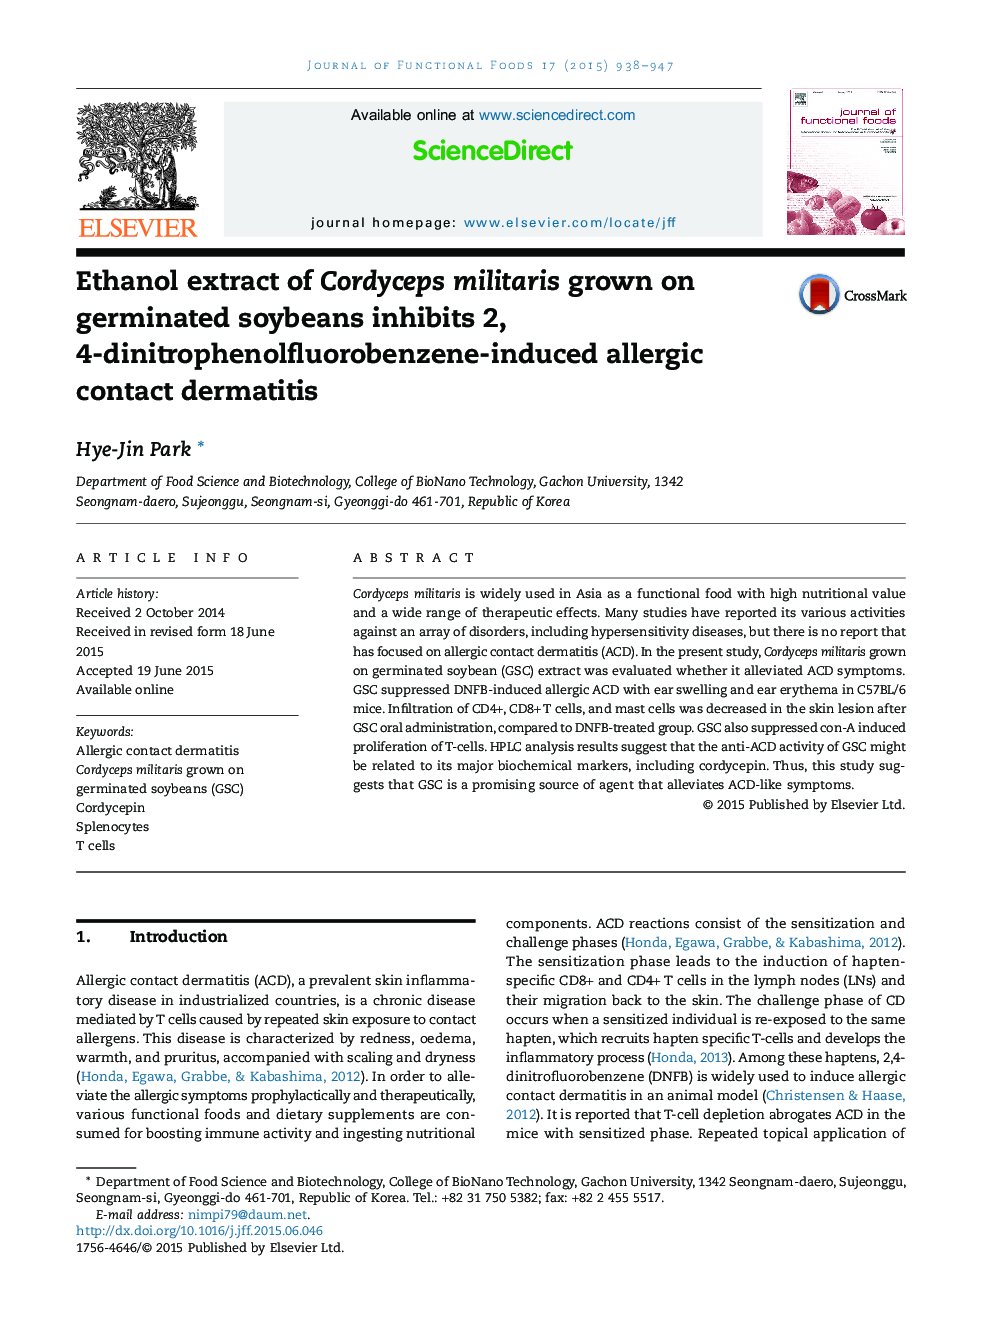 Ethanol extract of Cordyceps militaris grown on germinated soybeans inhibits 2, 4-dinitrophenolfluorobenzene-induced allergic contact dermatitis